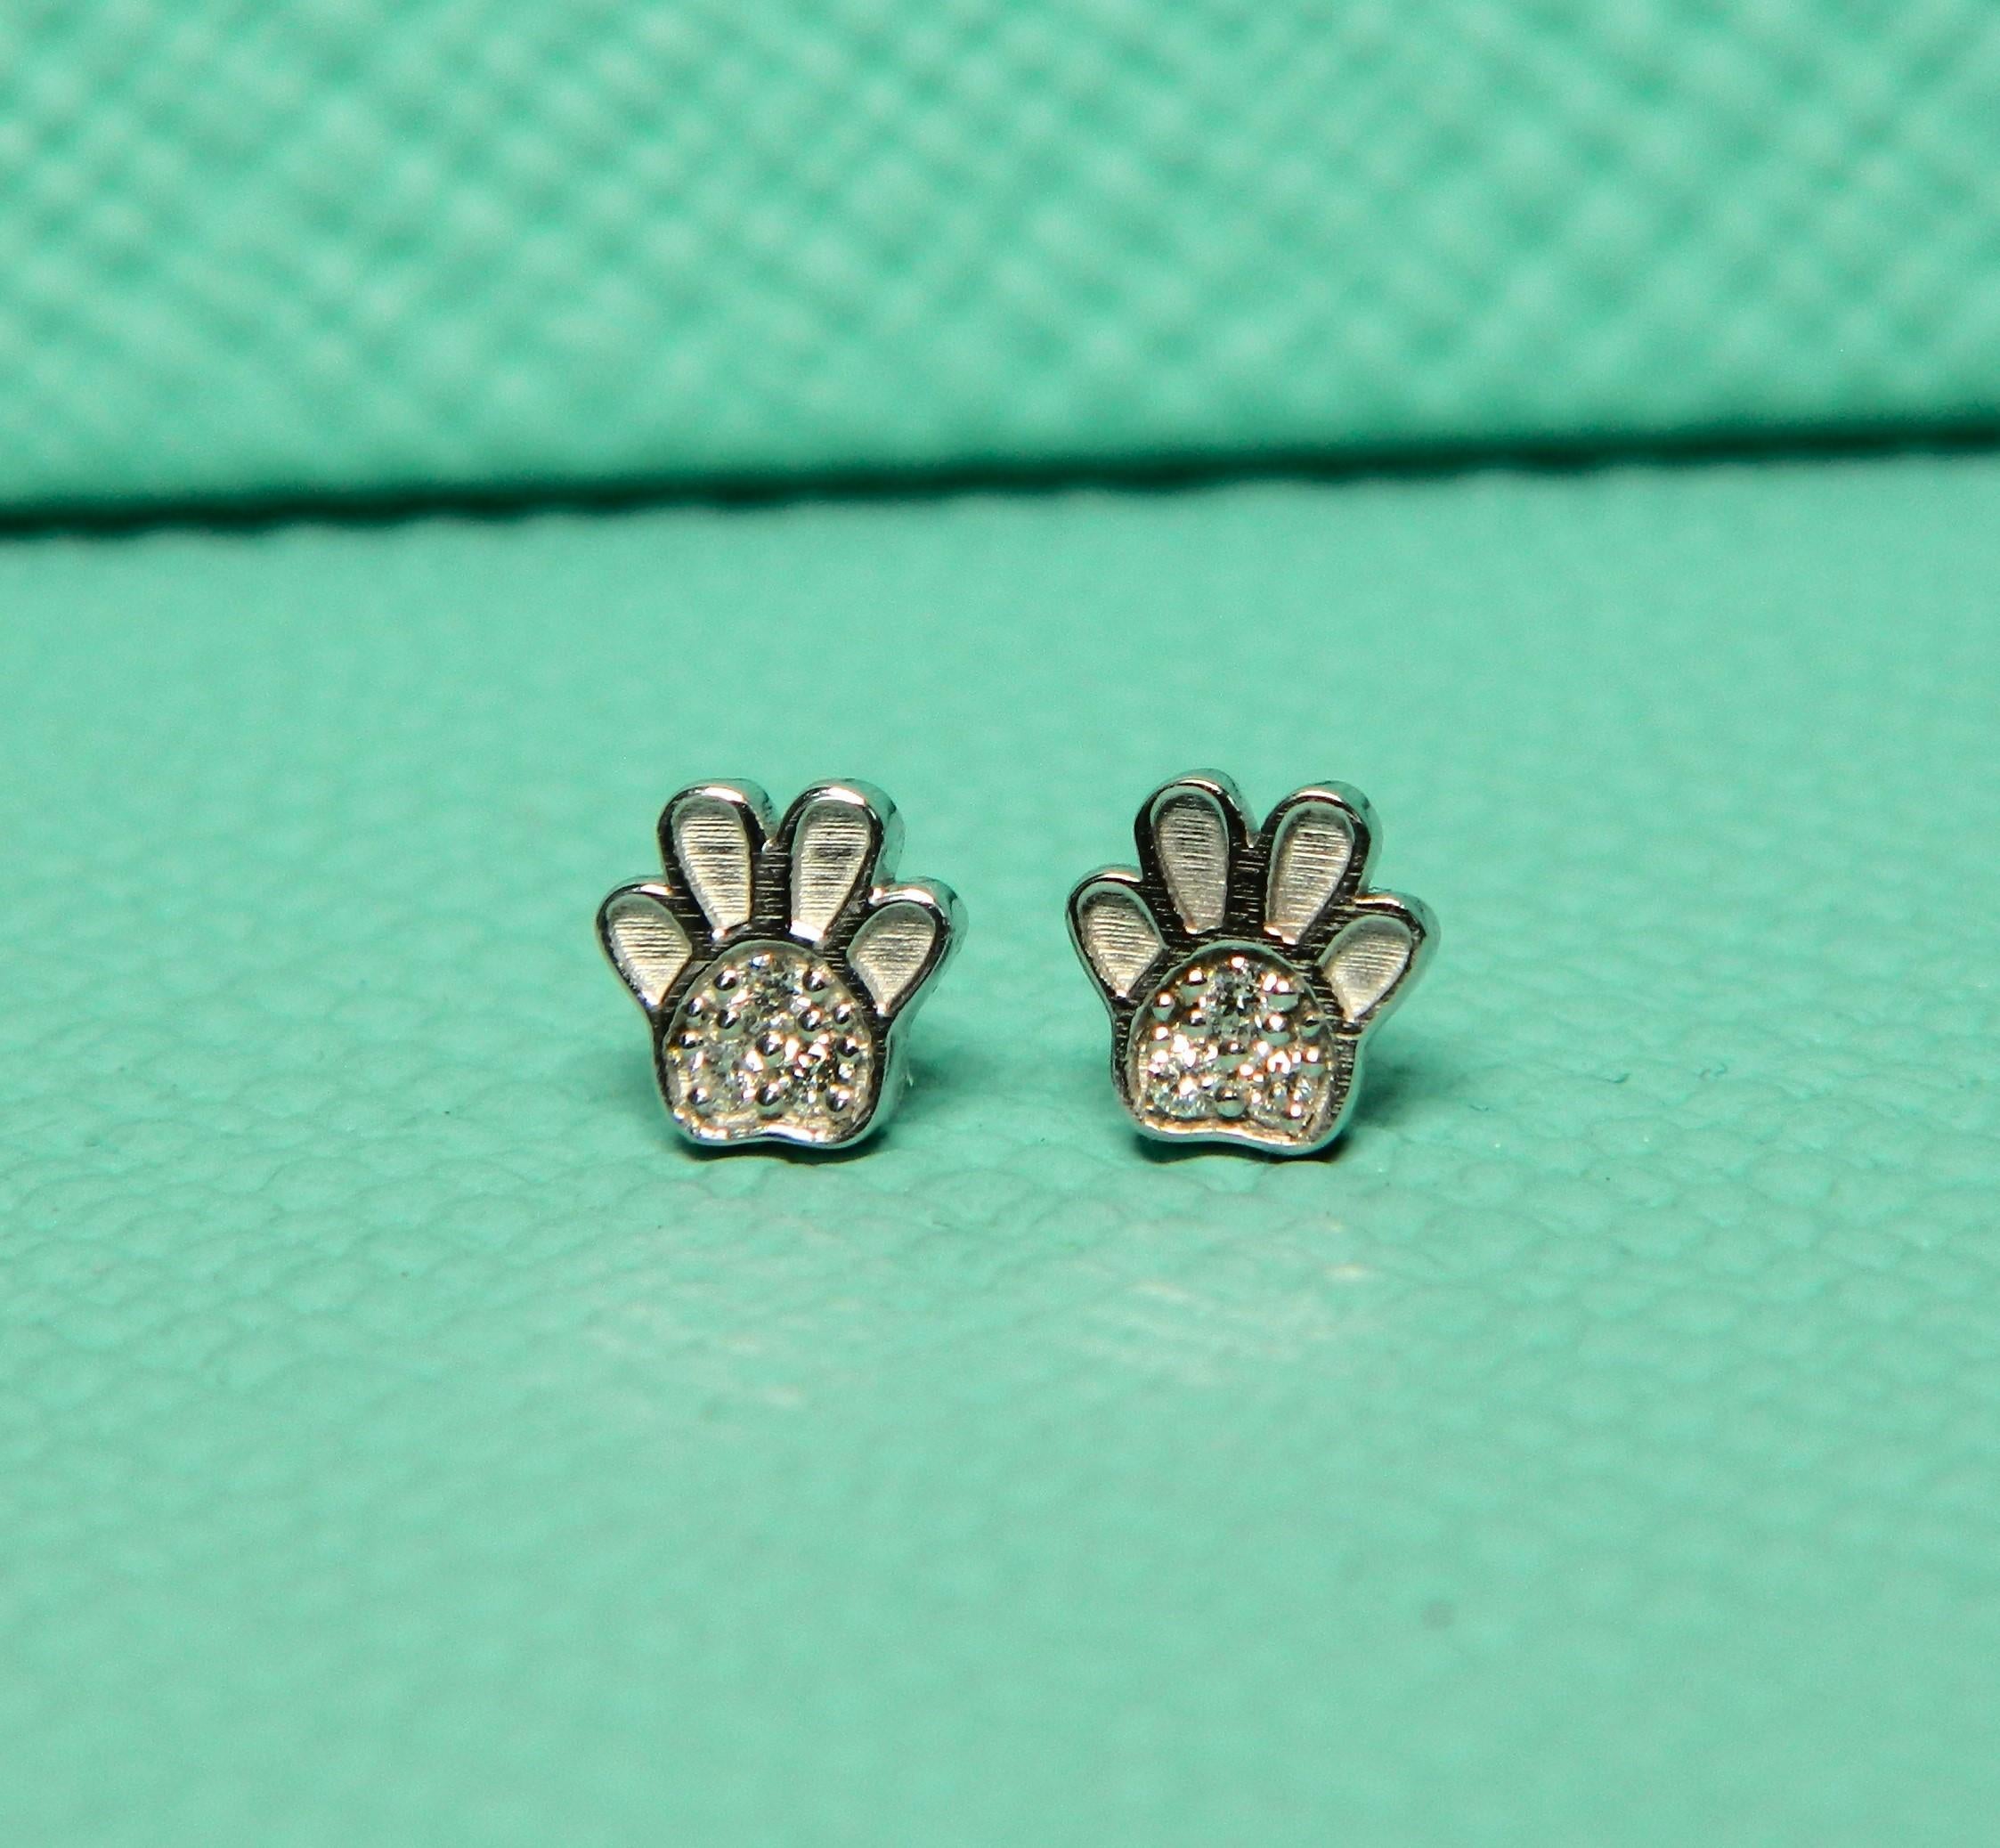 New adorable mini earring stack paw print earrings in 14K white gold and diamonds. For the animal lover and multi piercings, these will get noticed. They are less than 1/4